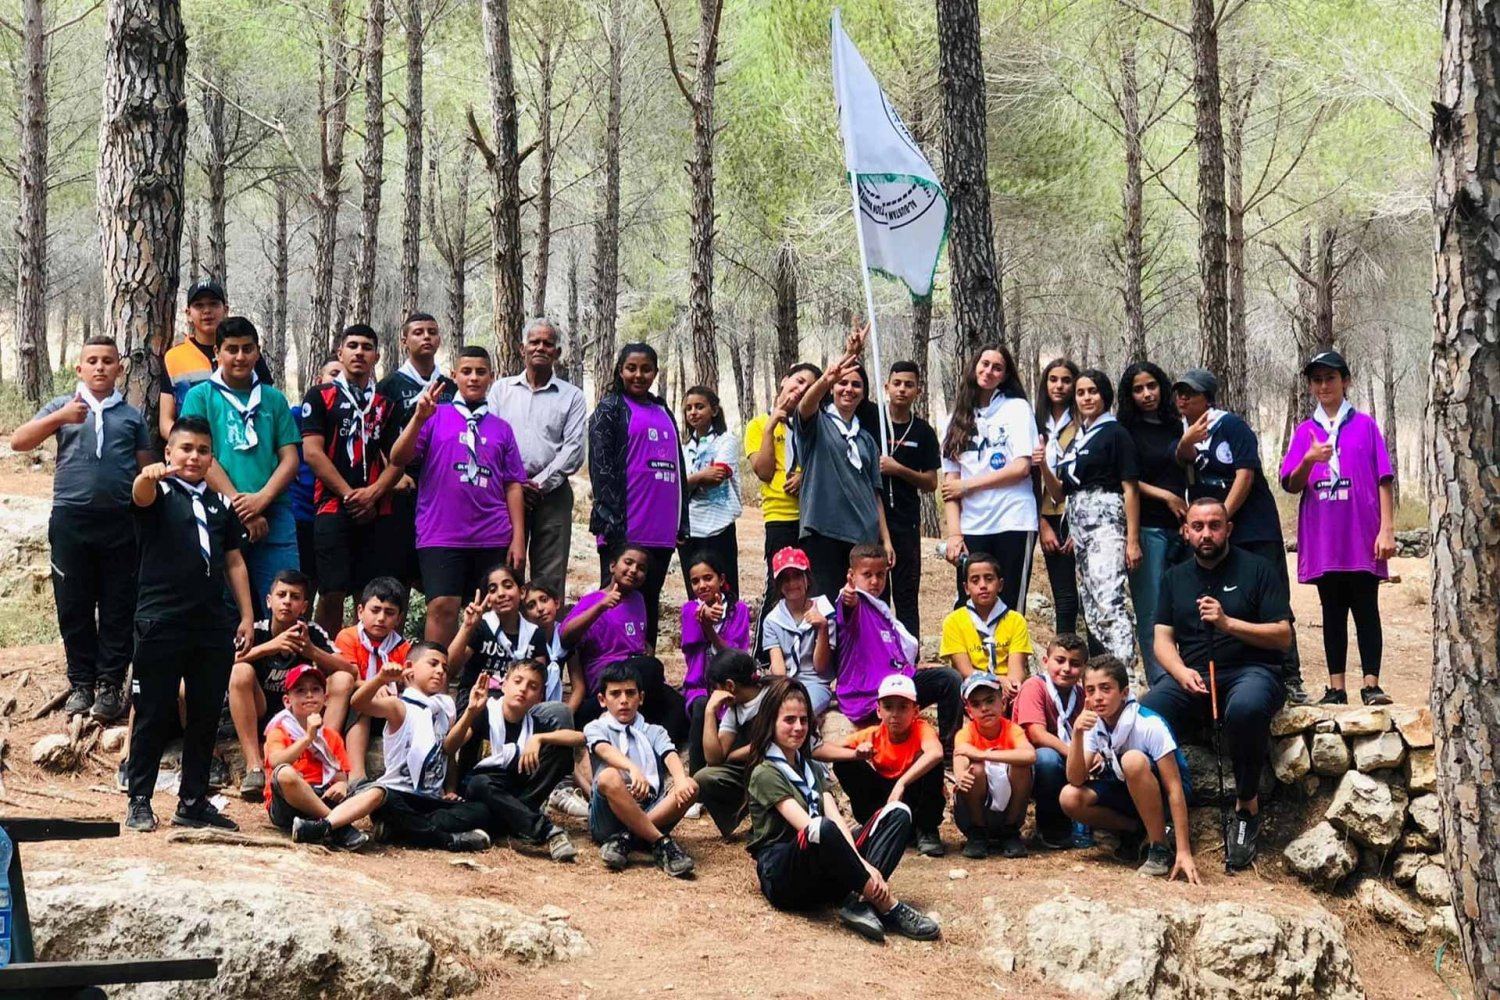 Youth from Jerusalem's Silwan neighborhood gather in a woods for summer camp